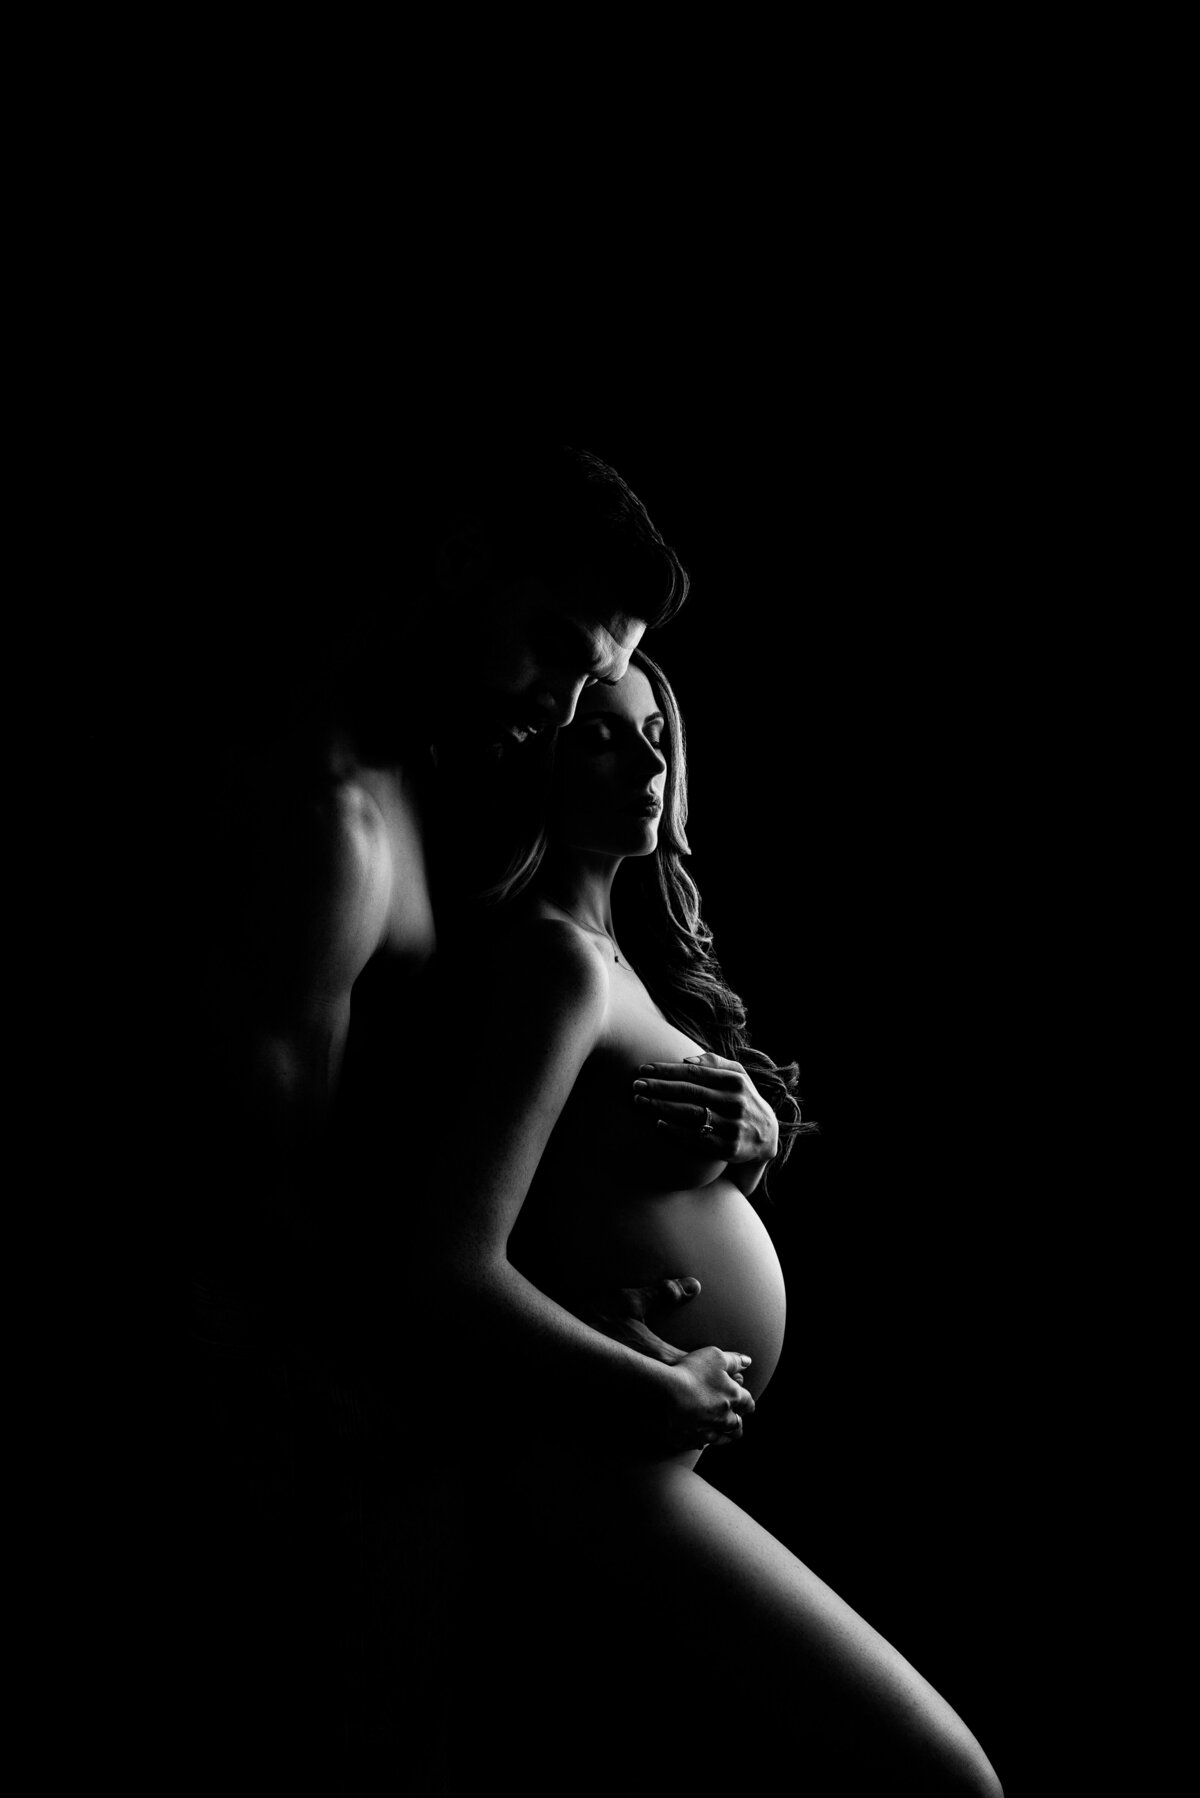 An intimate fine art maternity photoshoot captured by Katie Marshall, best maternity photographer in New Jersey. A black and white images features an expectant mom standing side bare and side profile to the camera with her husband standing behind her. His cheek is resting against her temple and both have their eyes closed. The woman's forearm is covering her breasts and her husband's hand is resting underneath her bump. There are alot of highlights and shadows to add great dimension to the photo.